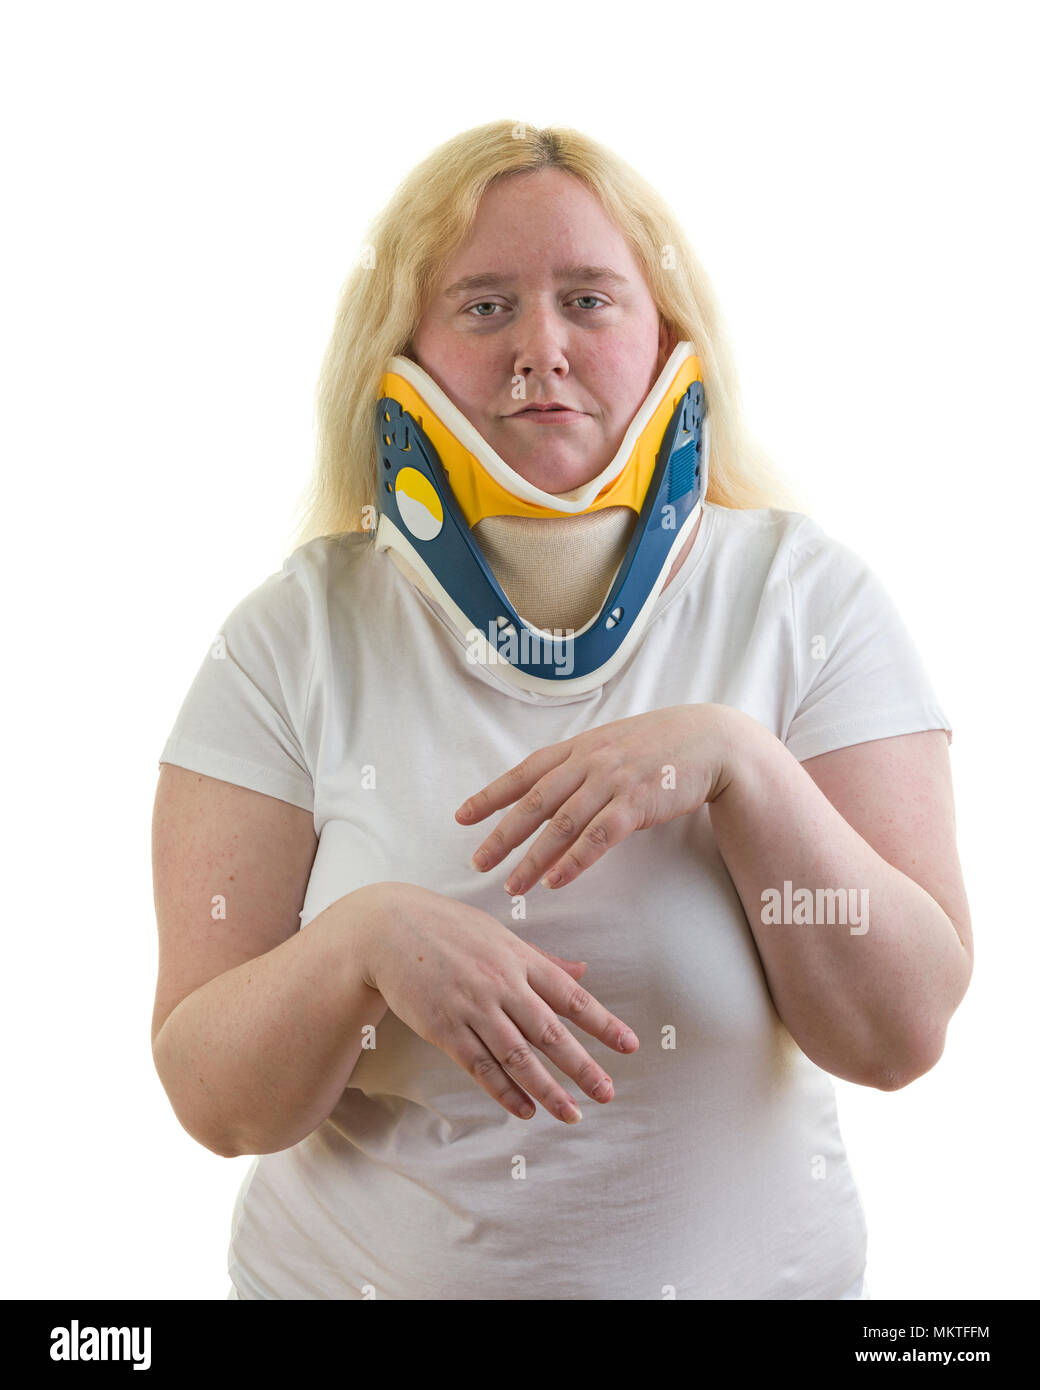 Caucasian blonde adult 30s female woman wearing a cervical collar aka a C spine collar or neck brace isolated on white background  Model Release: Yes Property Release: No. Stock Photo